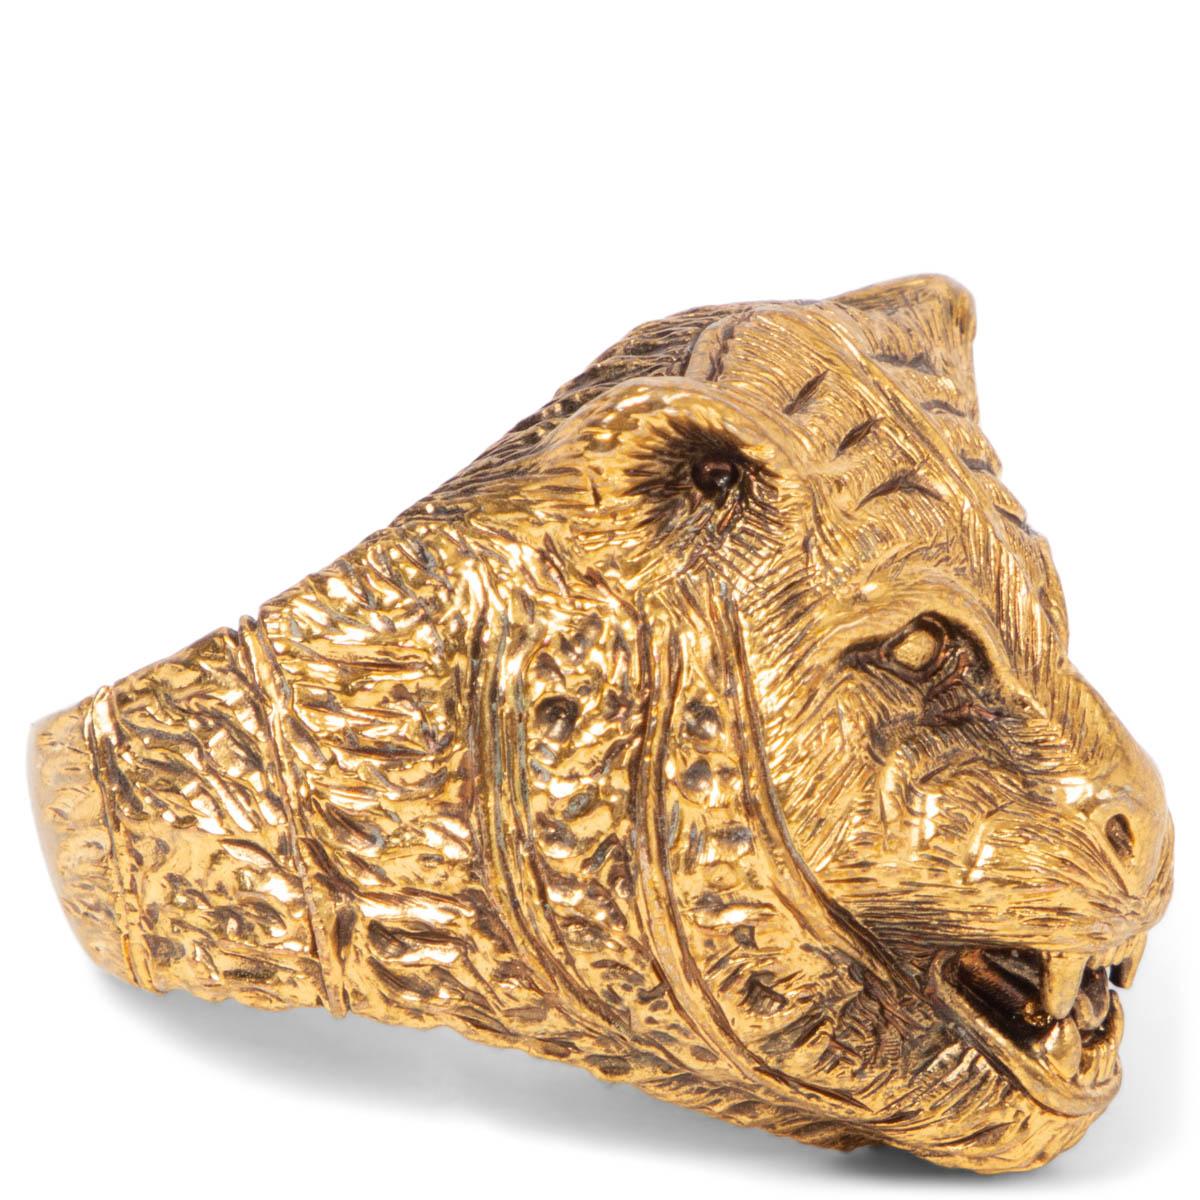 100% authentic Gucci Anger Forest Feline Head ring in aged gold-tone metal. Has been worn and is in excellent condition.

Measurements
Size	10
Width	2.8cm (1.1in)
Length	2.5cm (1in)

All our listings include only the listed item unless otherwise